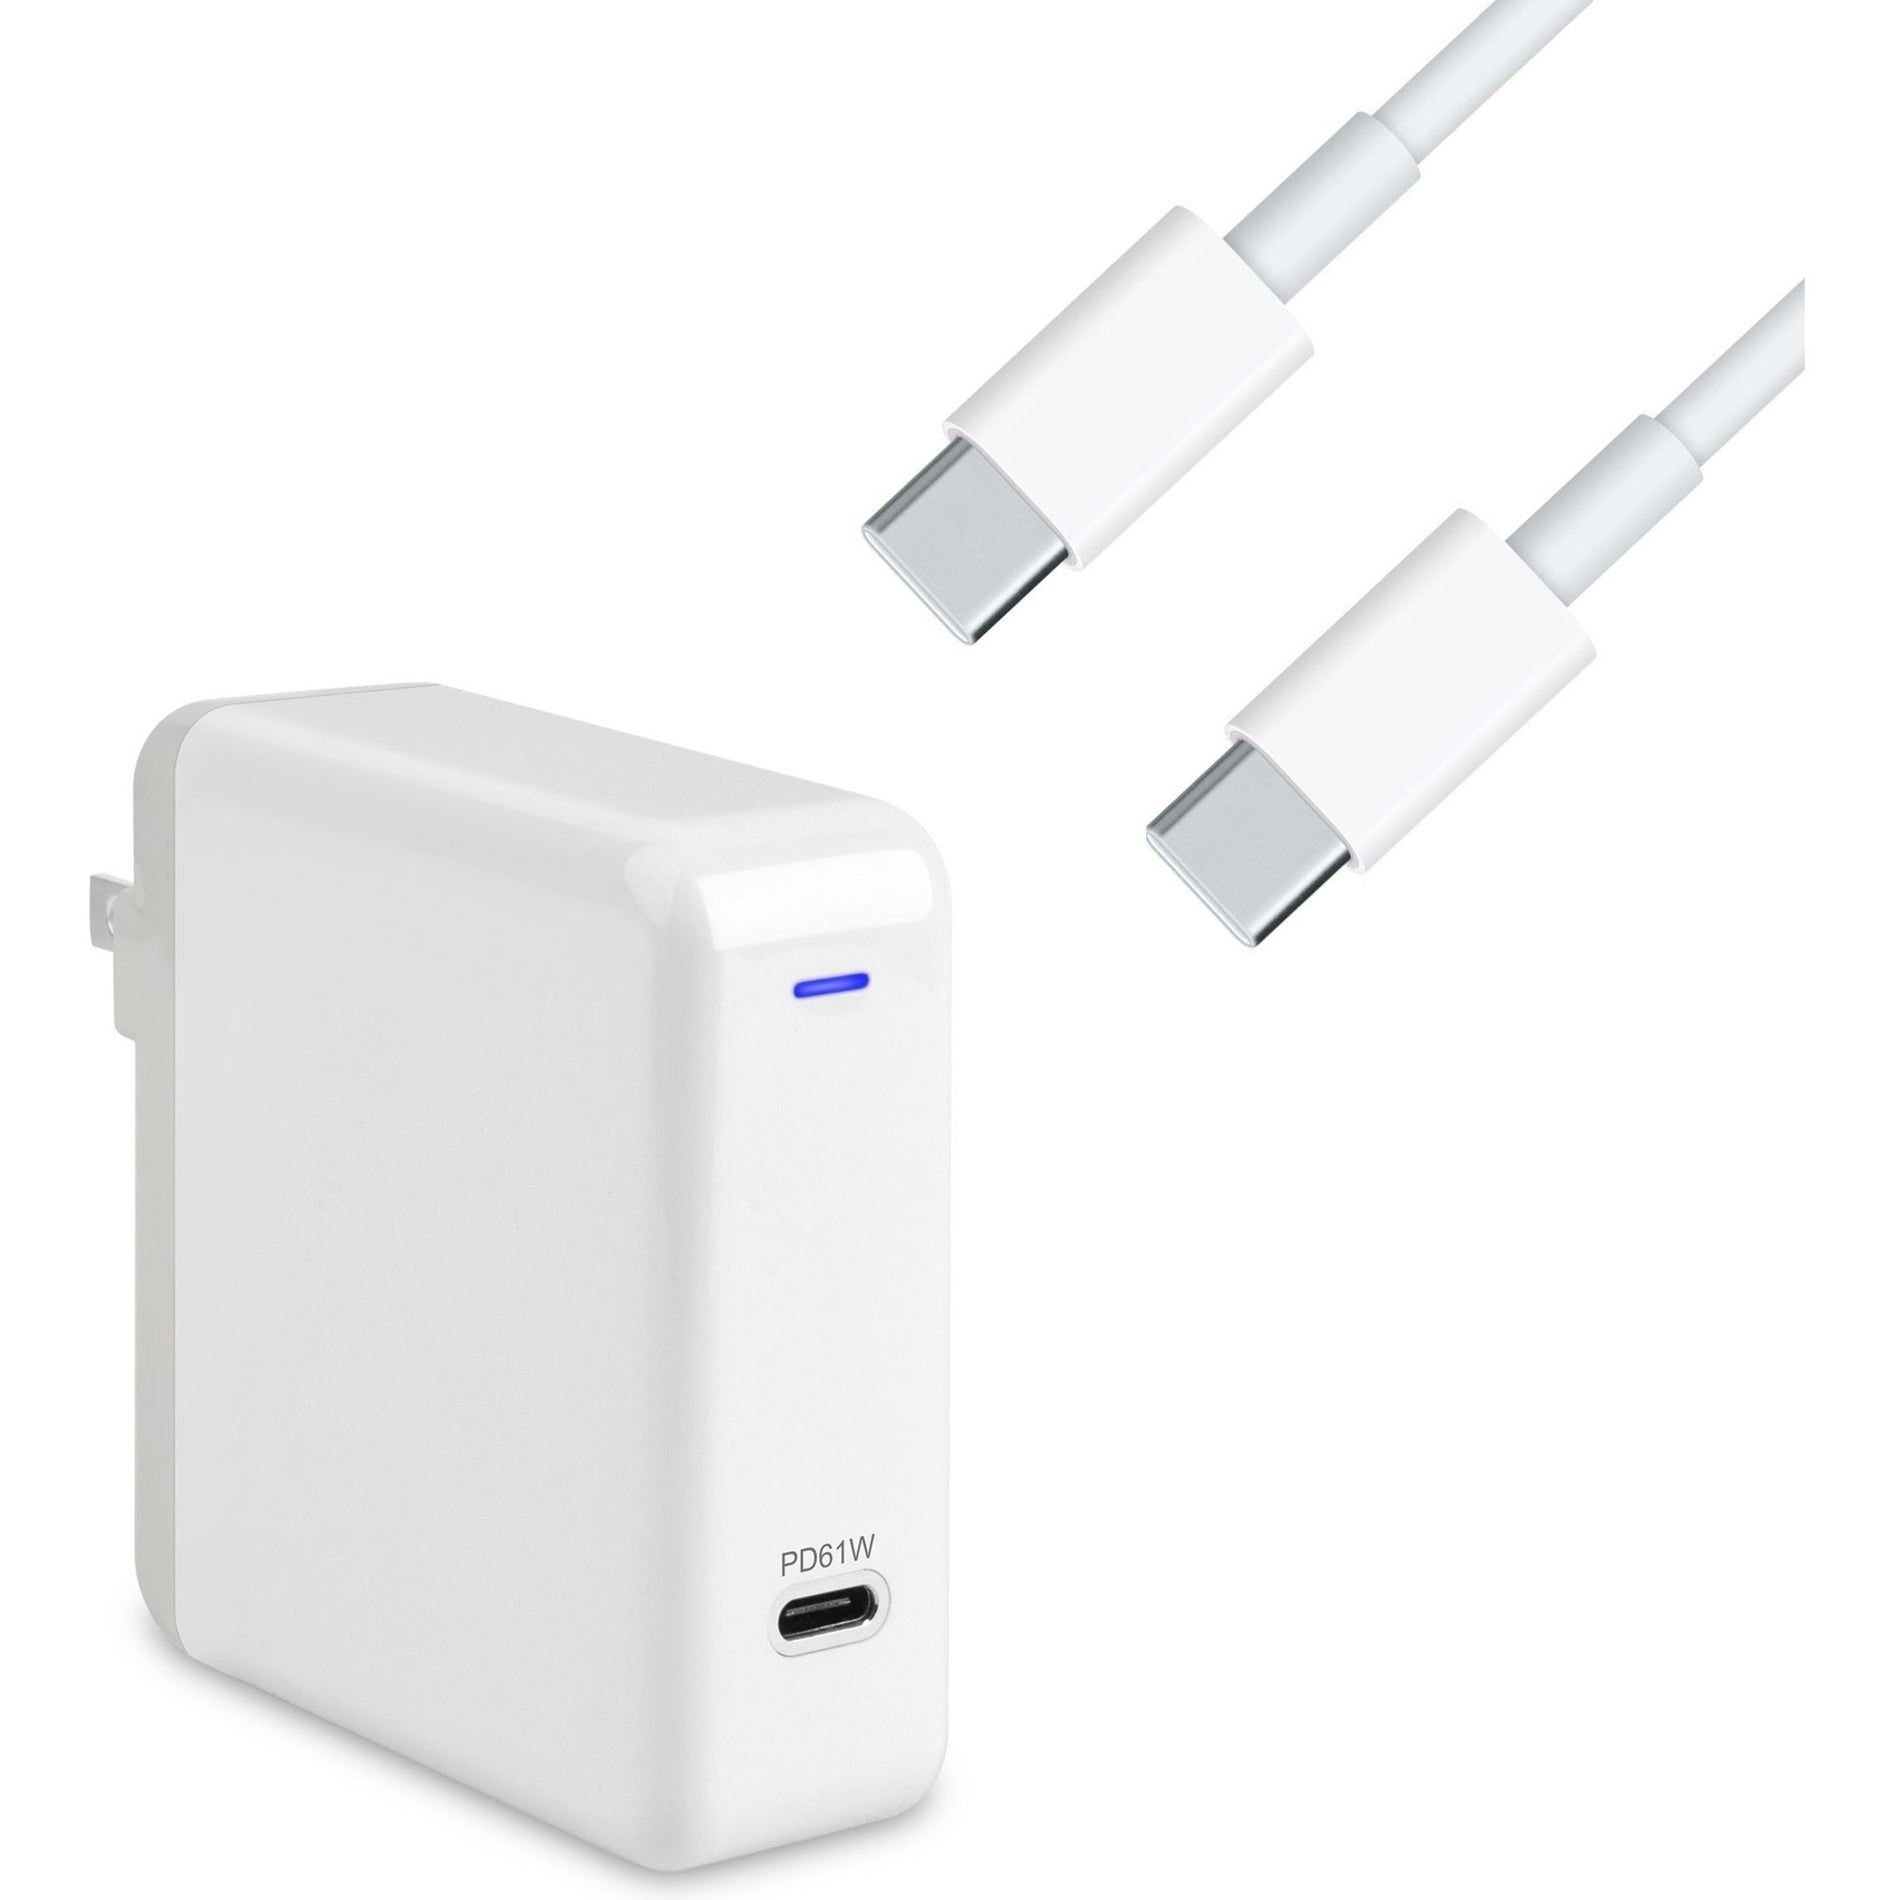 4XEM 4XMBOOKPROKIT61 Charging Kit Compatible for MacBook Pro, 96W USB-C Wall-Mounted Power Adapter, 6 ft Charging Cable